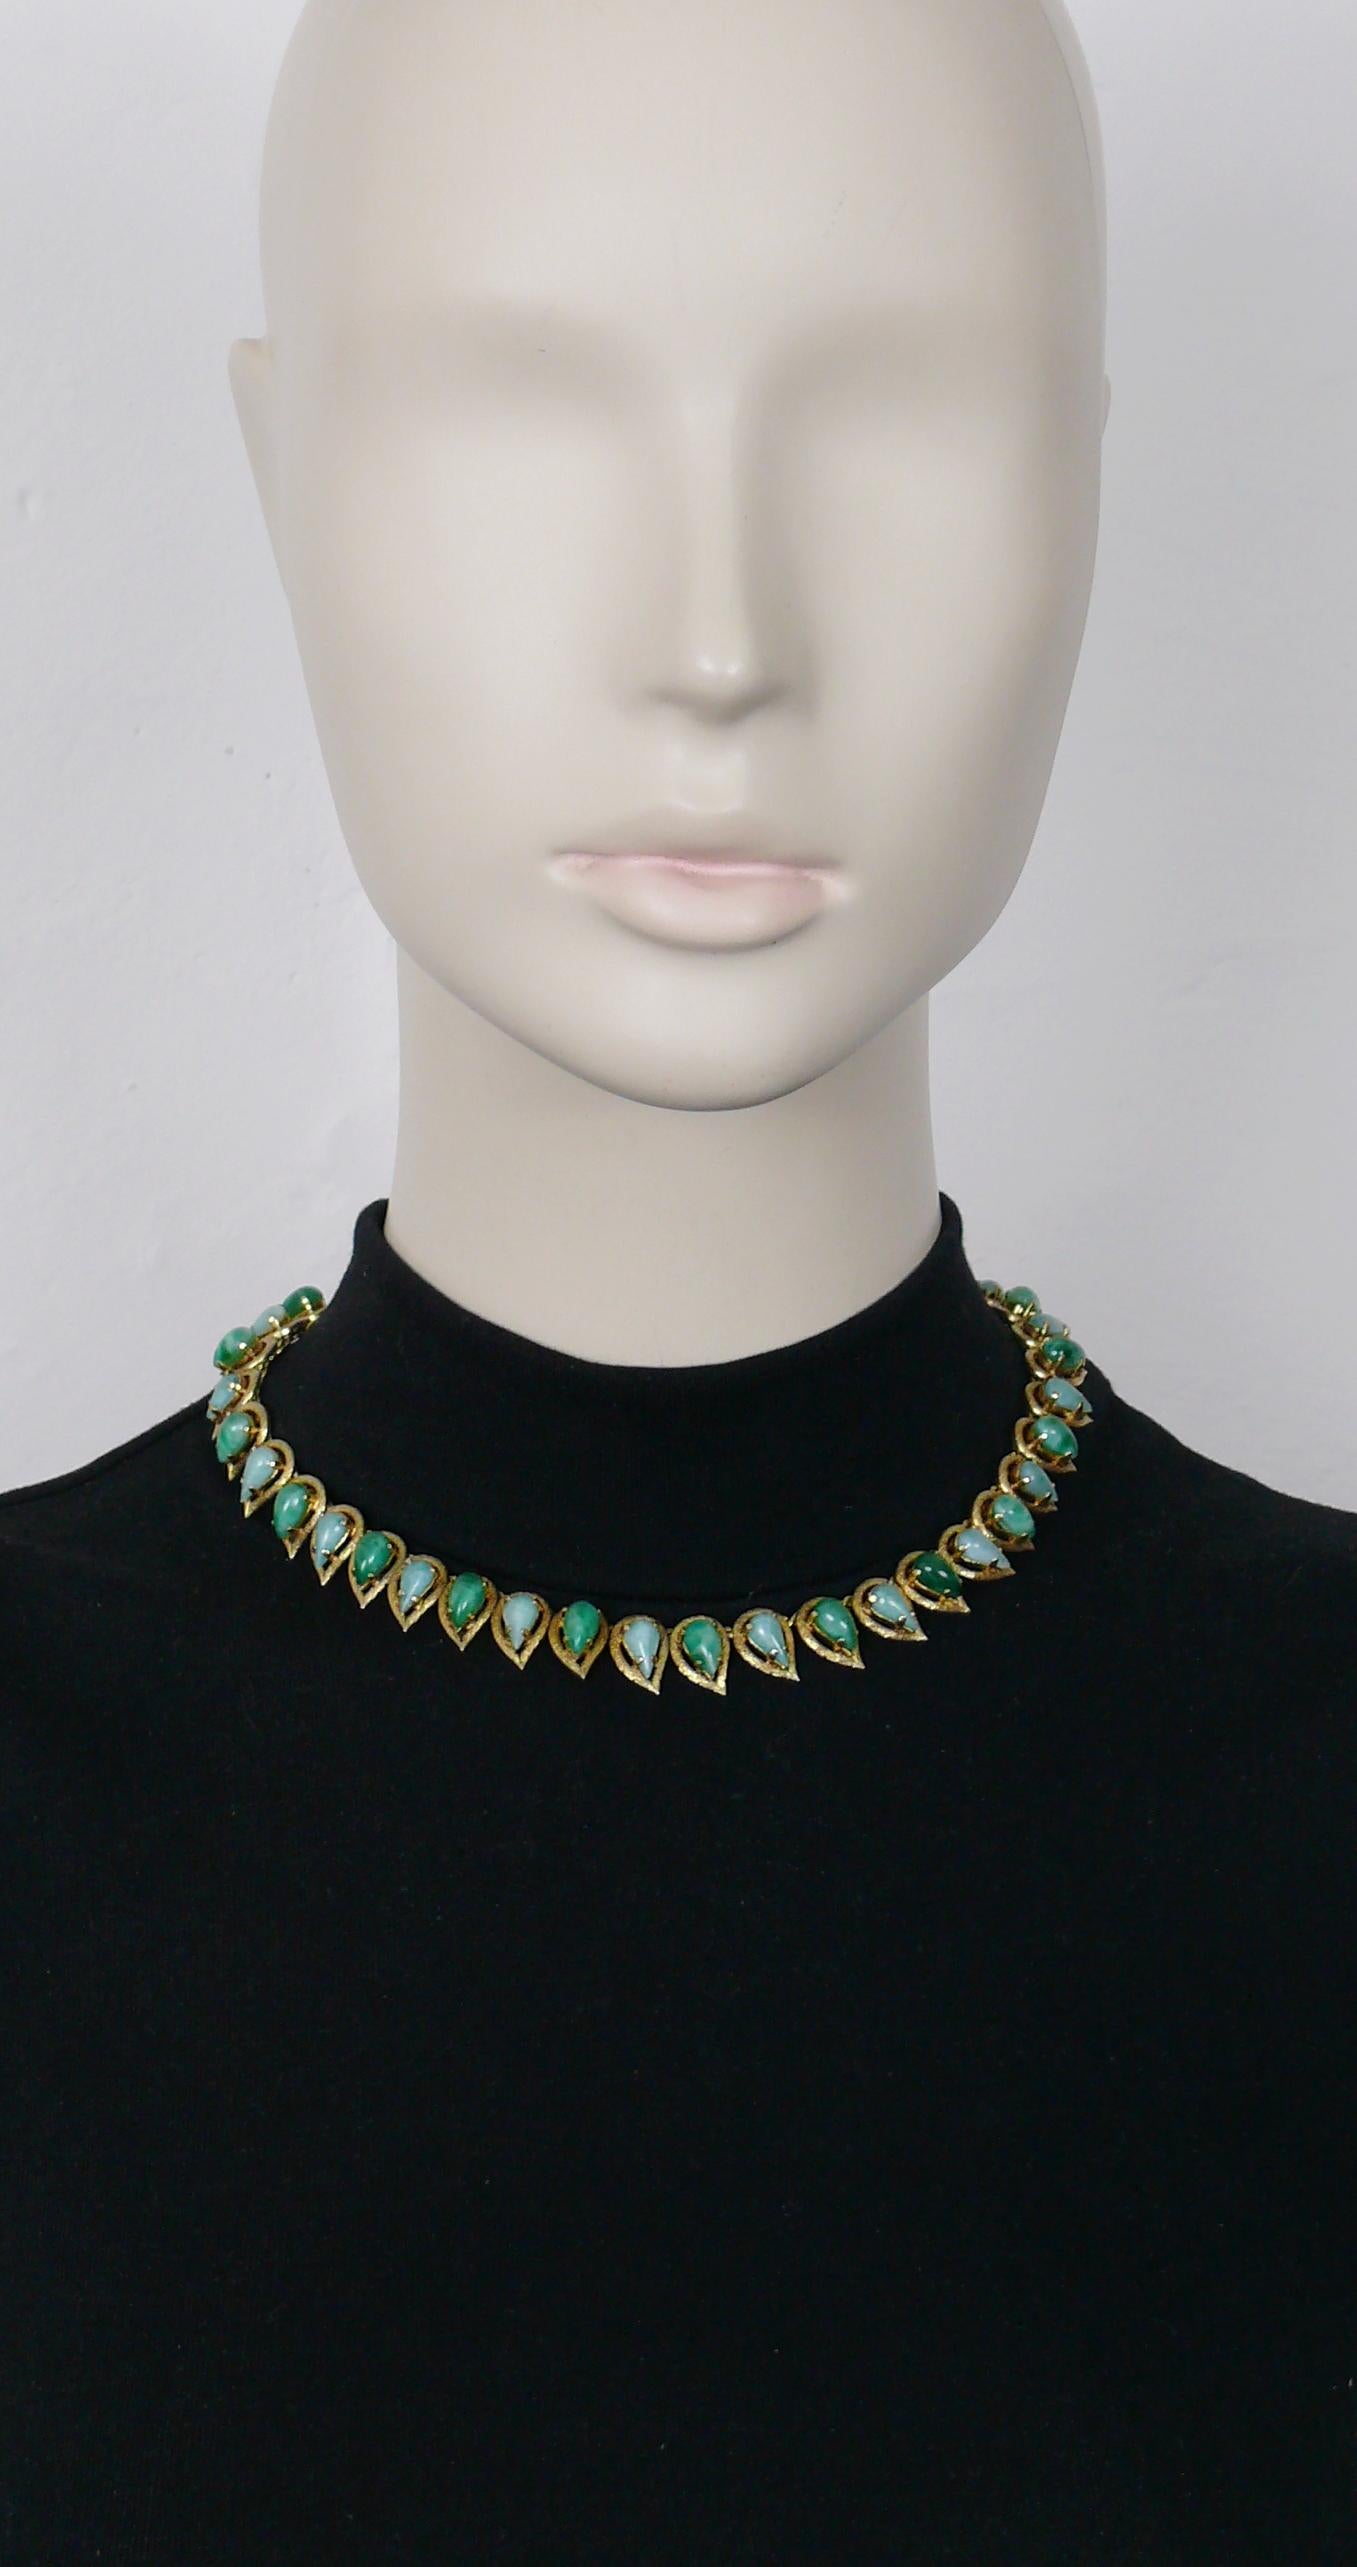 CHRISTIAN DIOR vintage gold toned articulated necklace embellished with faux jade pear-shaped glass stones.

Hidden push button closure.

Embossed CHR. DIOR 1965 © Germany.

Indicative measurements : length approx. 39 cm (15.35 inches) / width